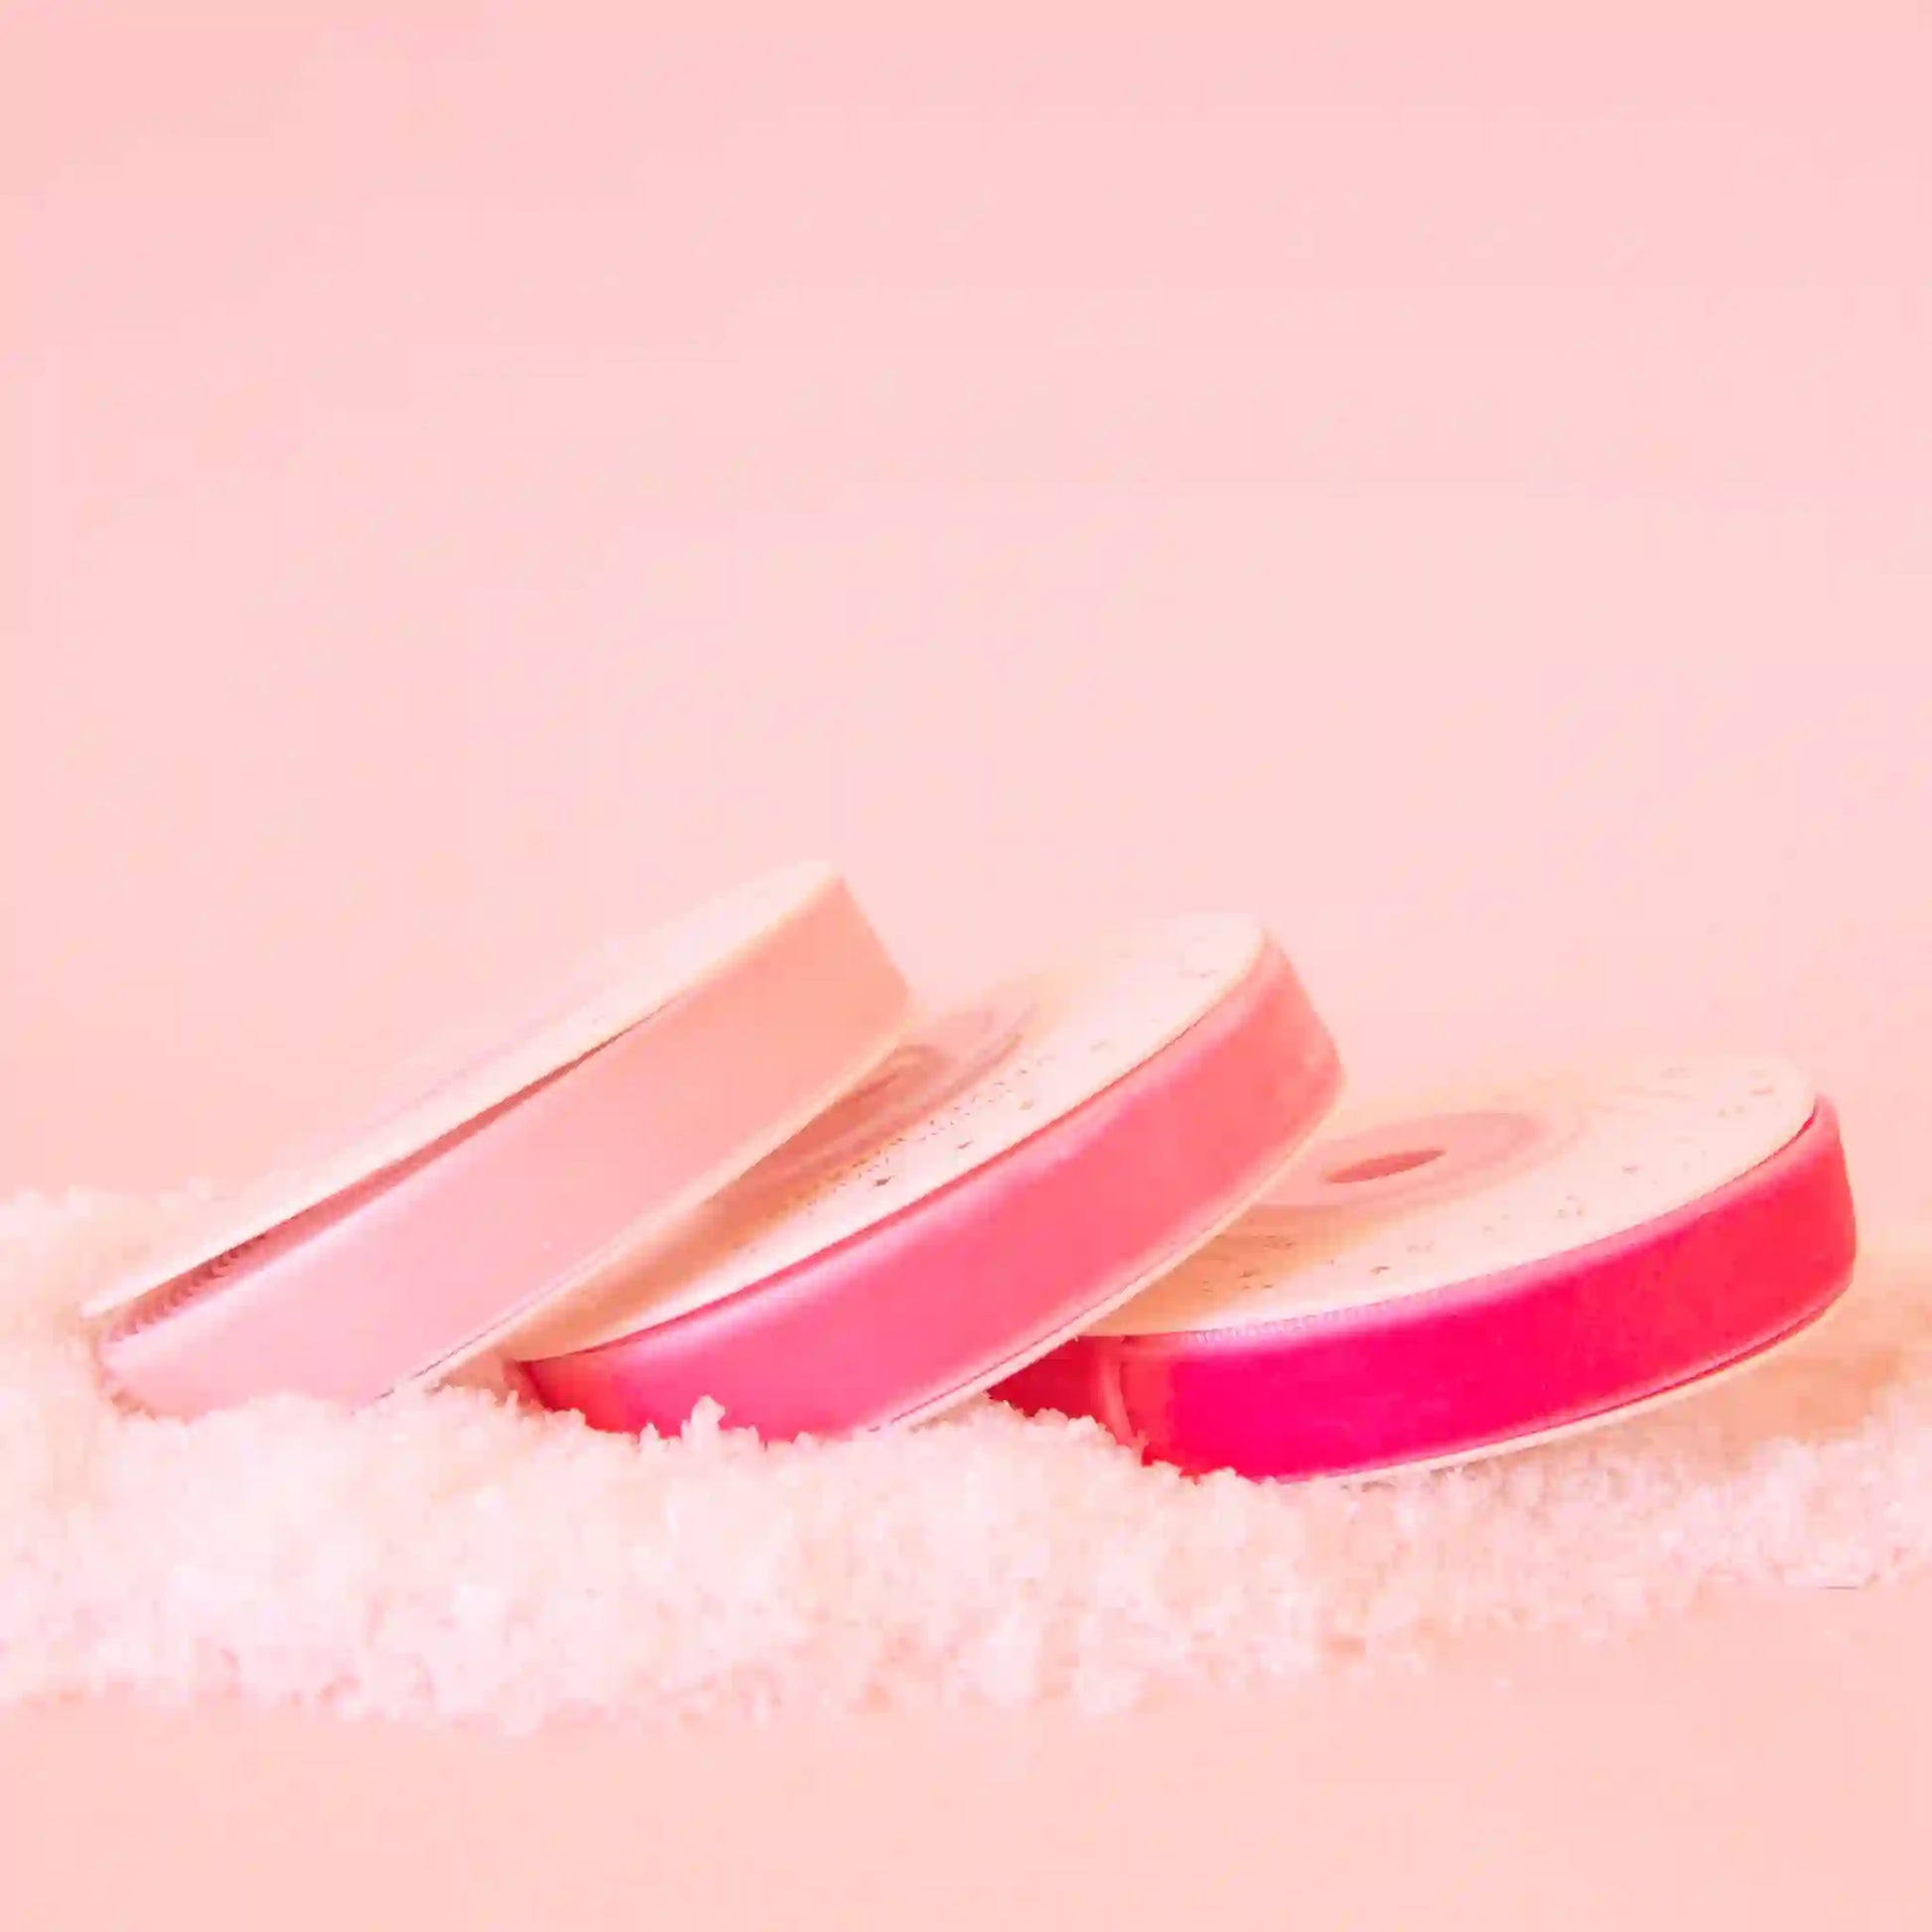 On a pink background is the three spools of velvet ribbon in three different shades of pink.